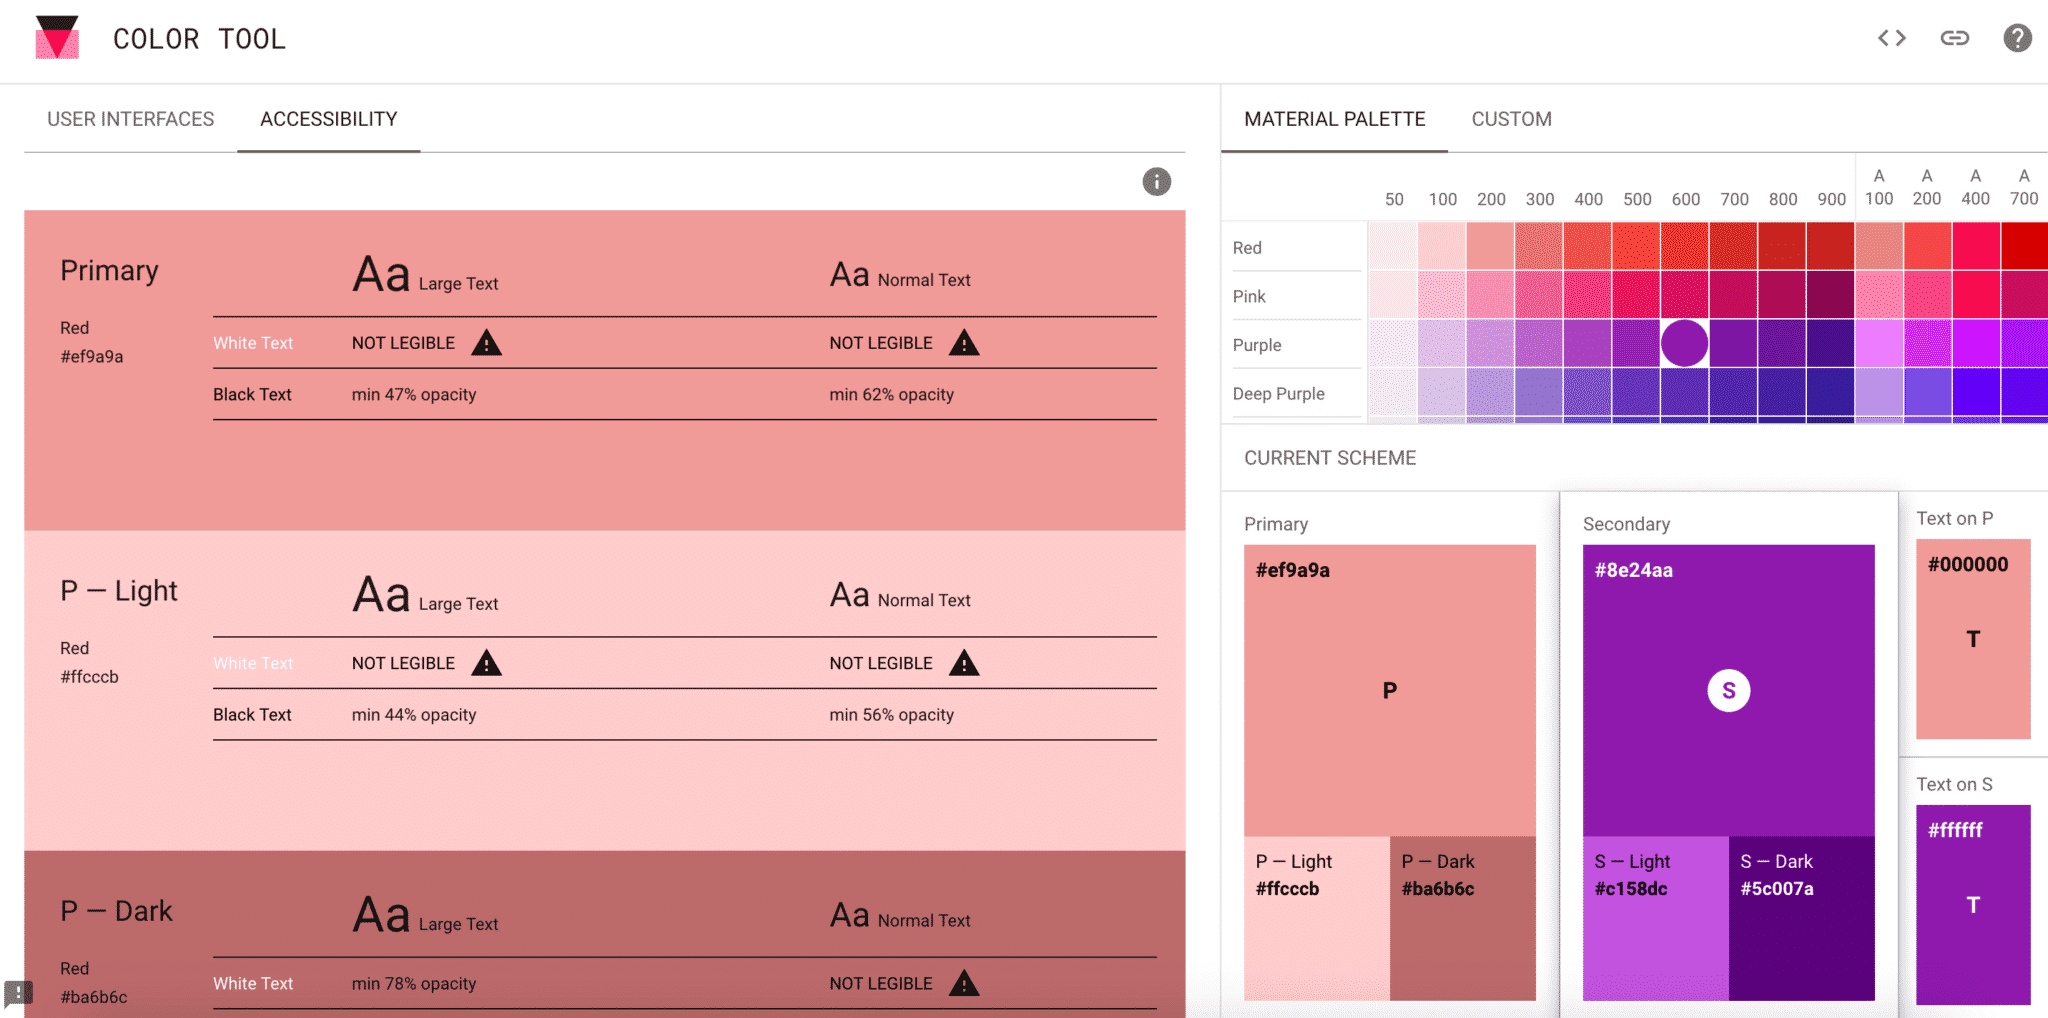 Interface of Color Tool, shows red and black combo and accepted levels of opacity for the black text.